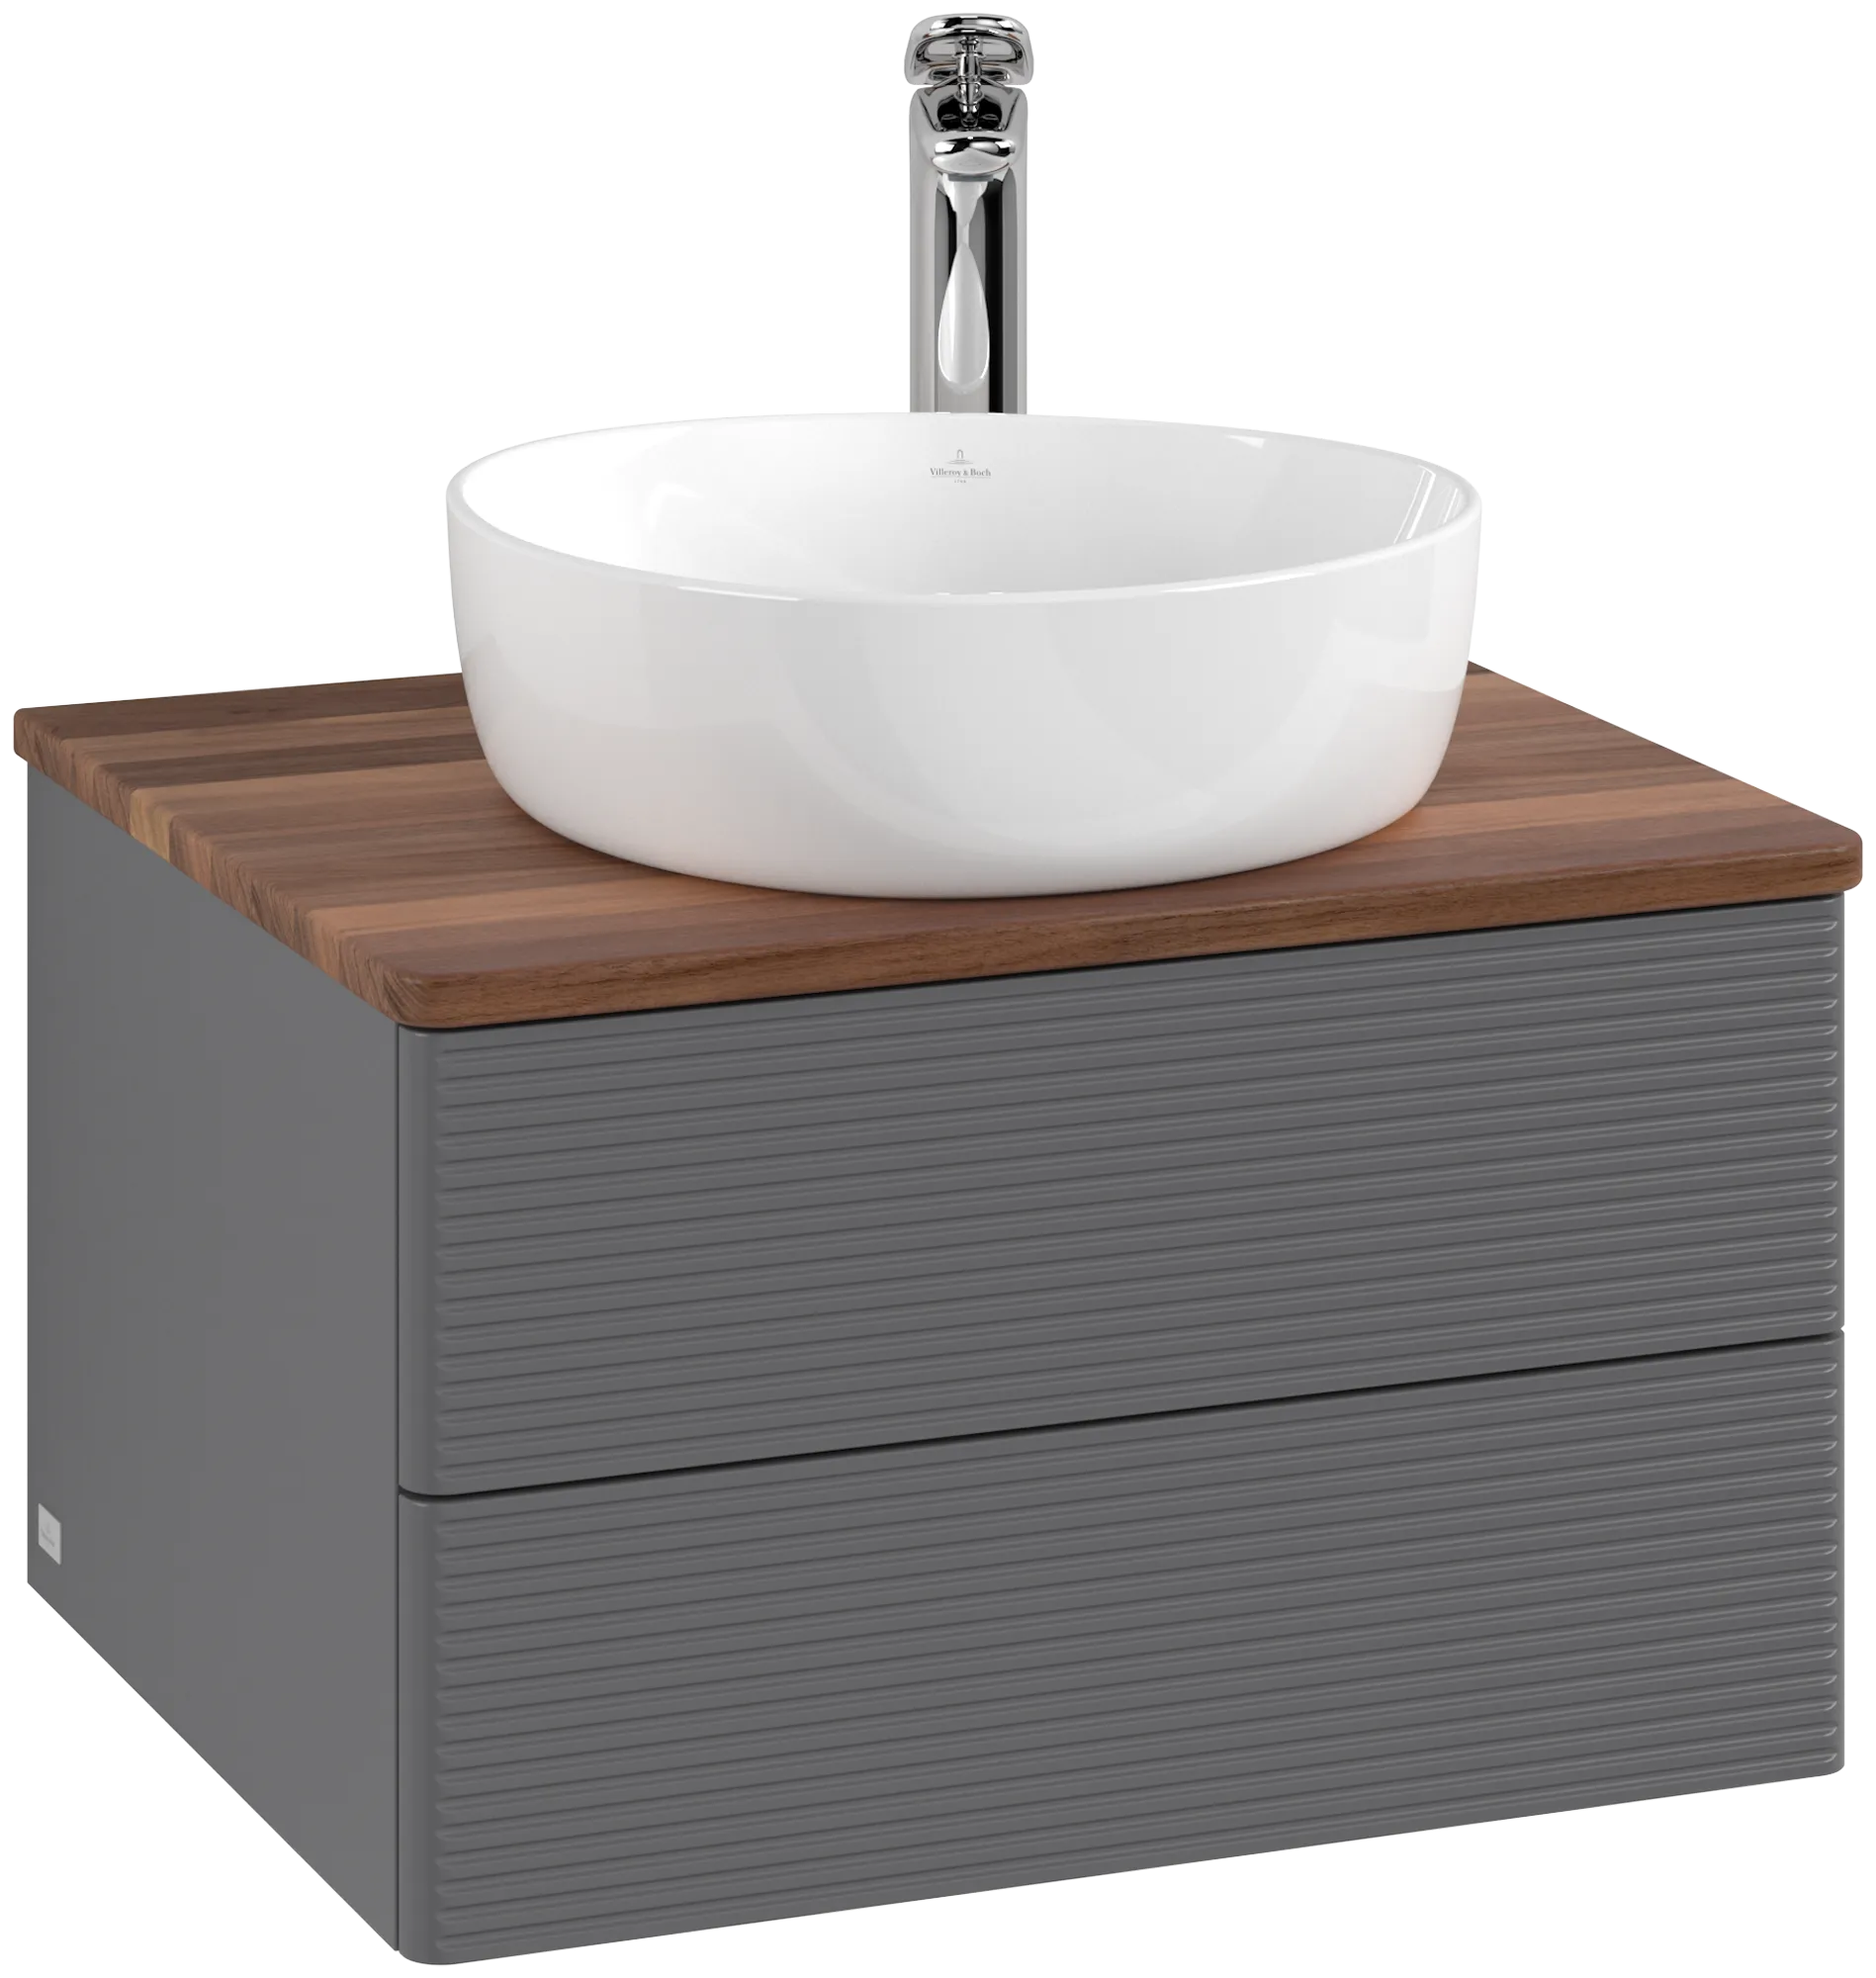 Picture of VILLEROY BOCH Antao Vanity unit, with lighting, 2 pull-out compartments, 600 x 360 x 500 mm, Front with grain texture, Anthracite Matt Lacquer / Warm Walnut #L18152GK